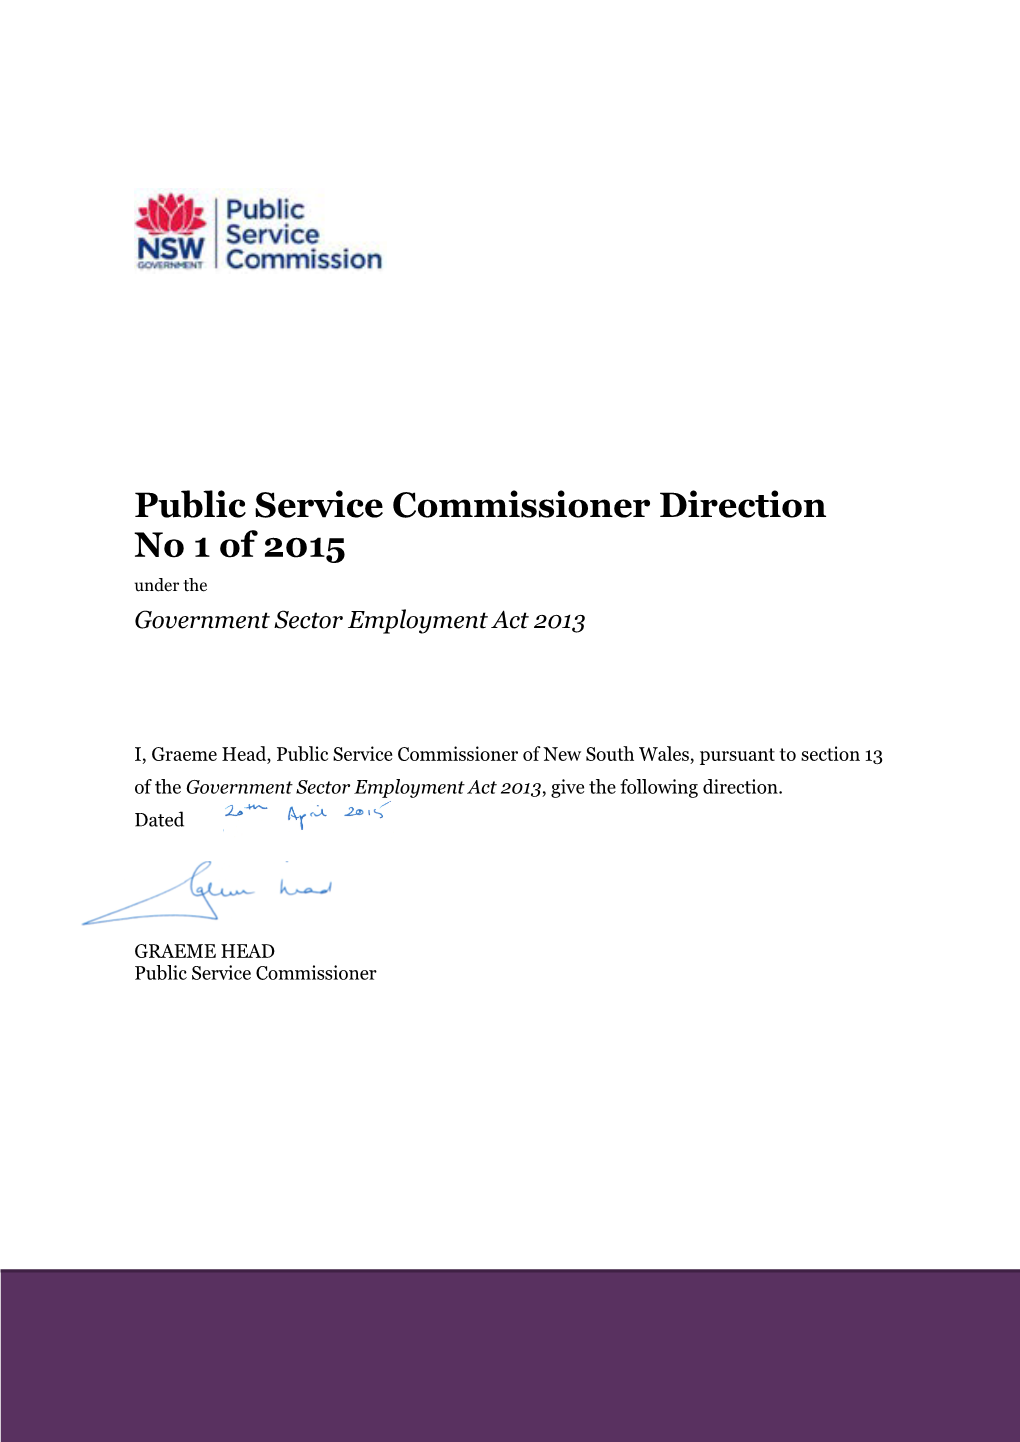 Public Service Commissioner Direction No 1 of 2015 Under the Government Sector Employment Act 2013